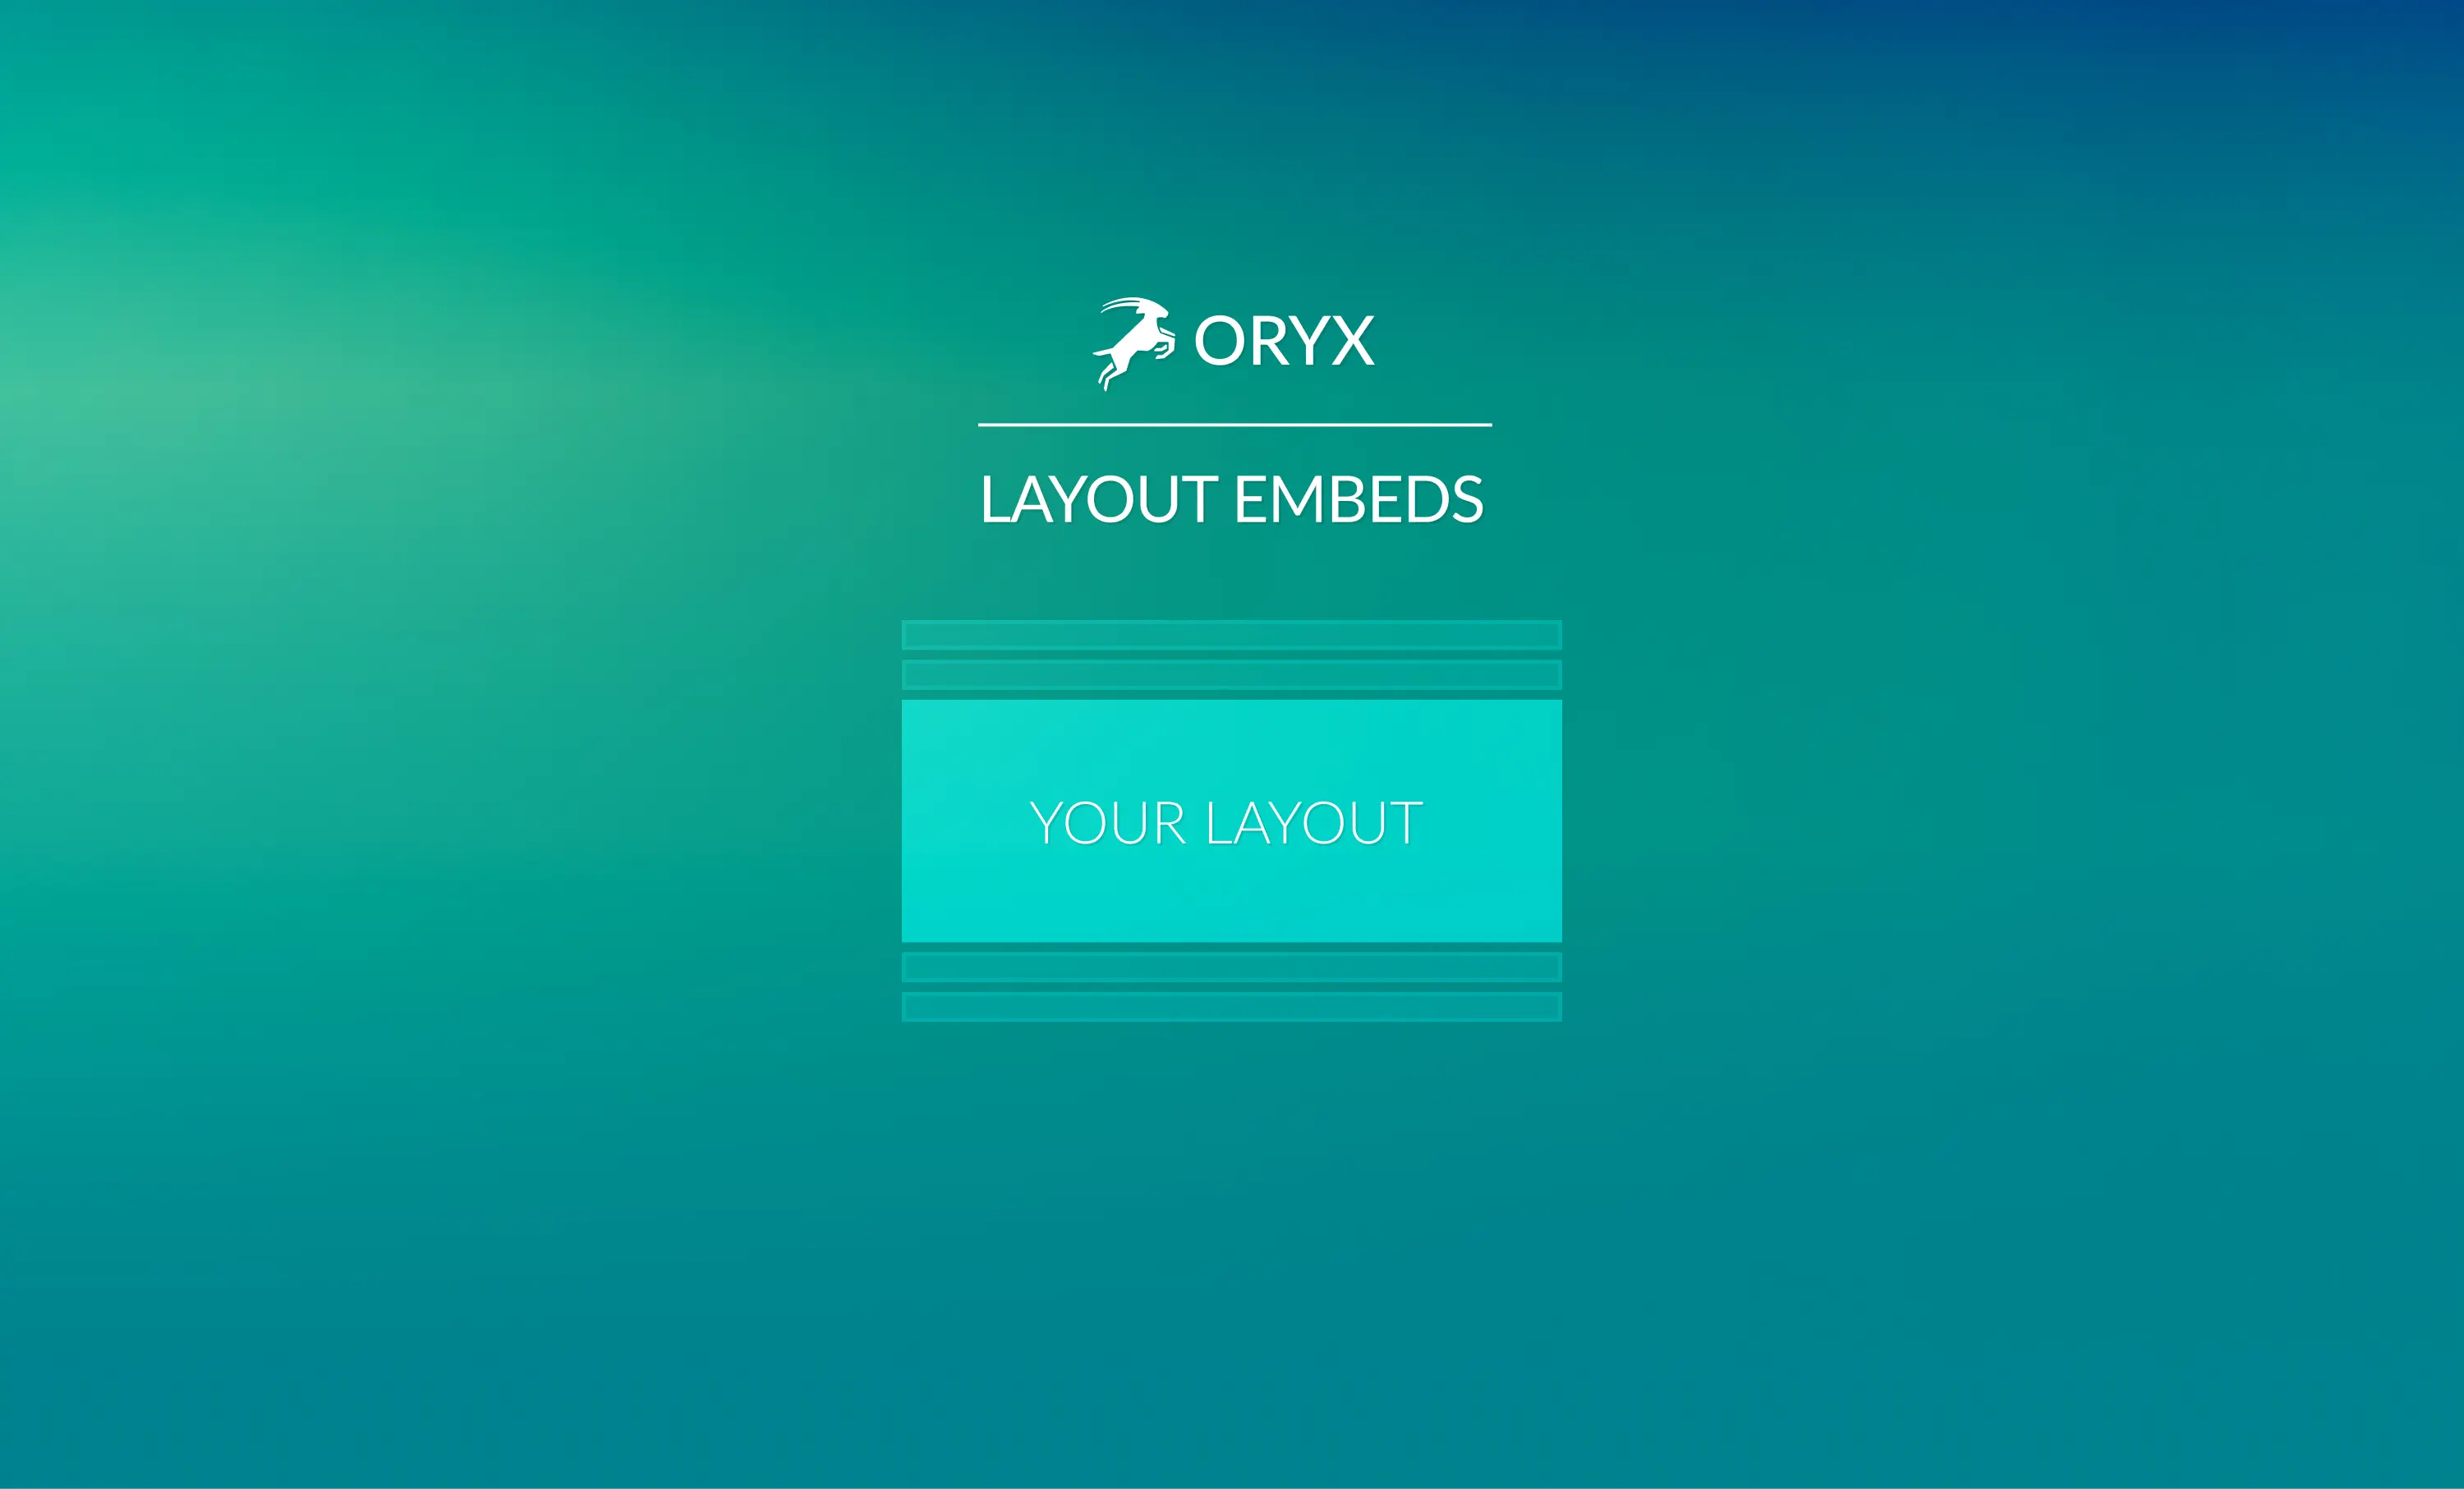 Introducing Layout Embeds